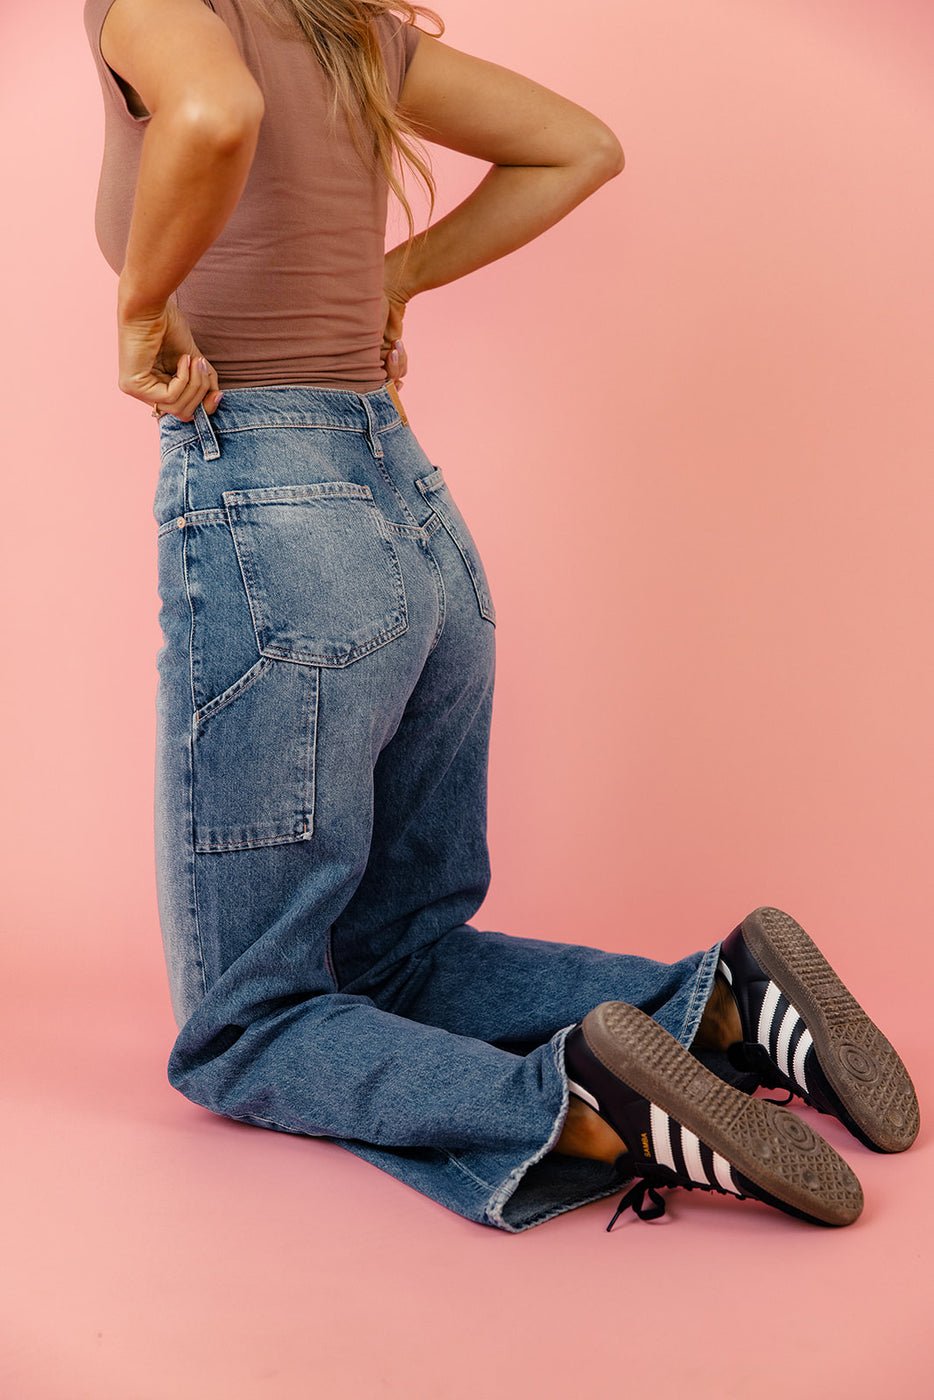 a person in jeans and shoes